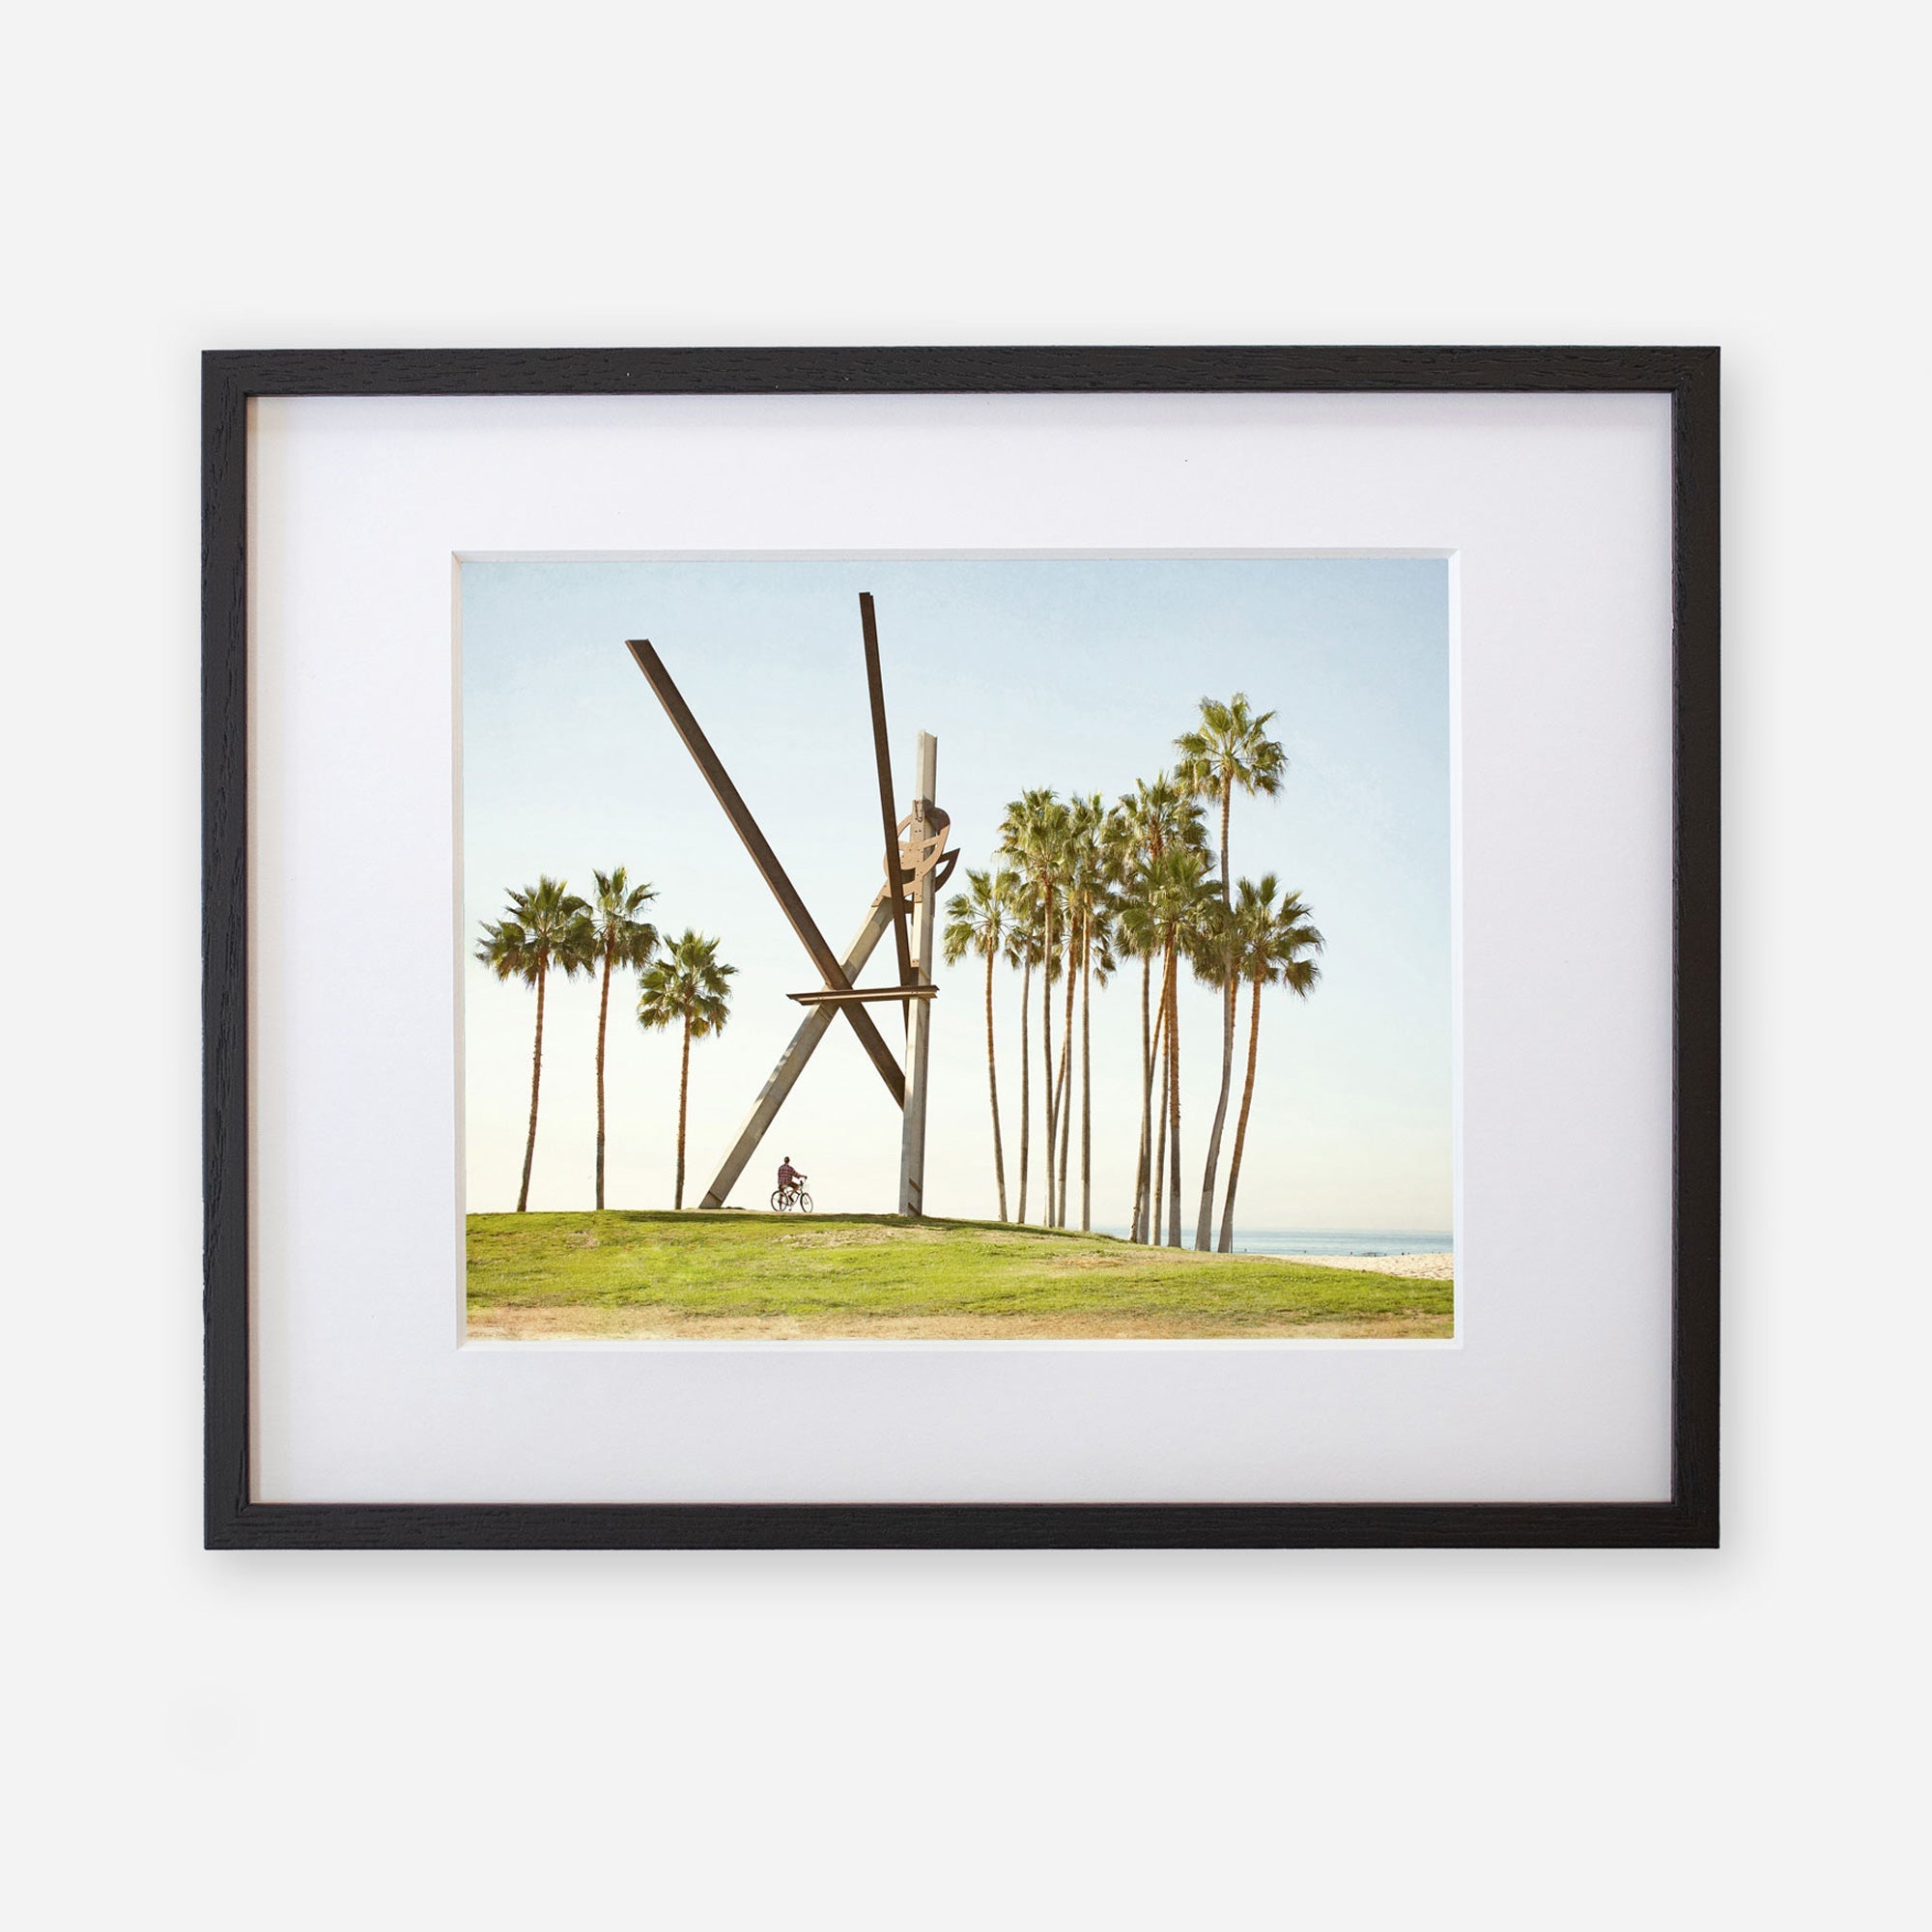 Unframed photograph of an outdoor scene featuring tall palm trees and a large modern sculpture resembling an &quot;x&quot; shape, set against a clear sky, with a small figure seated near the base of the Offley Green Venice Beach Landmark Sculpture, &#39;V is for Venice&#39;.